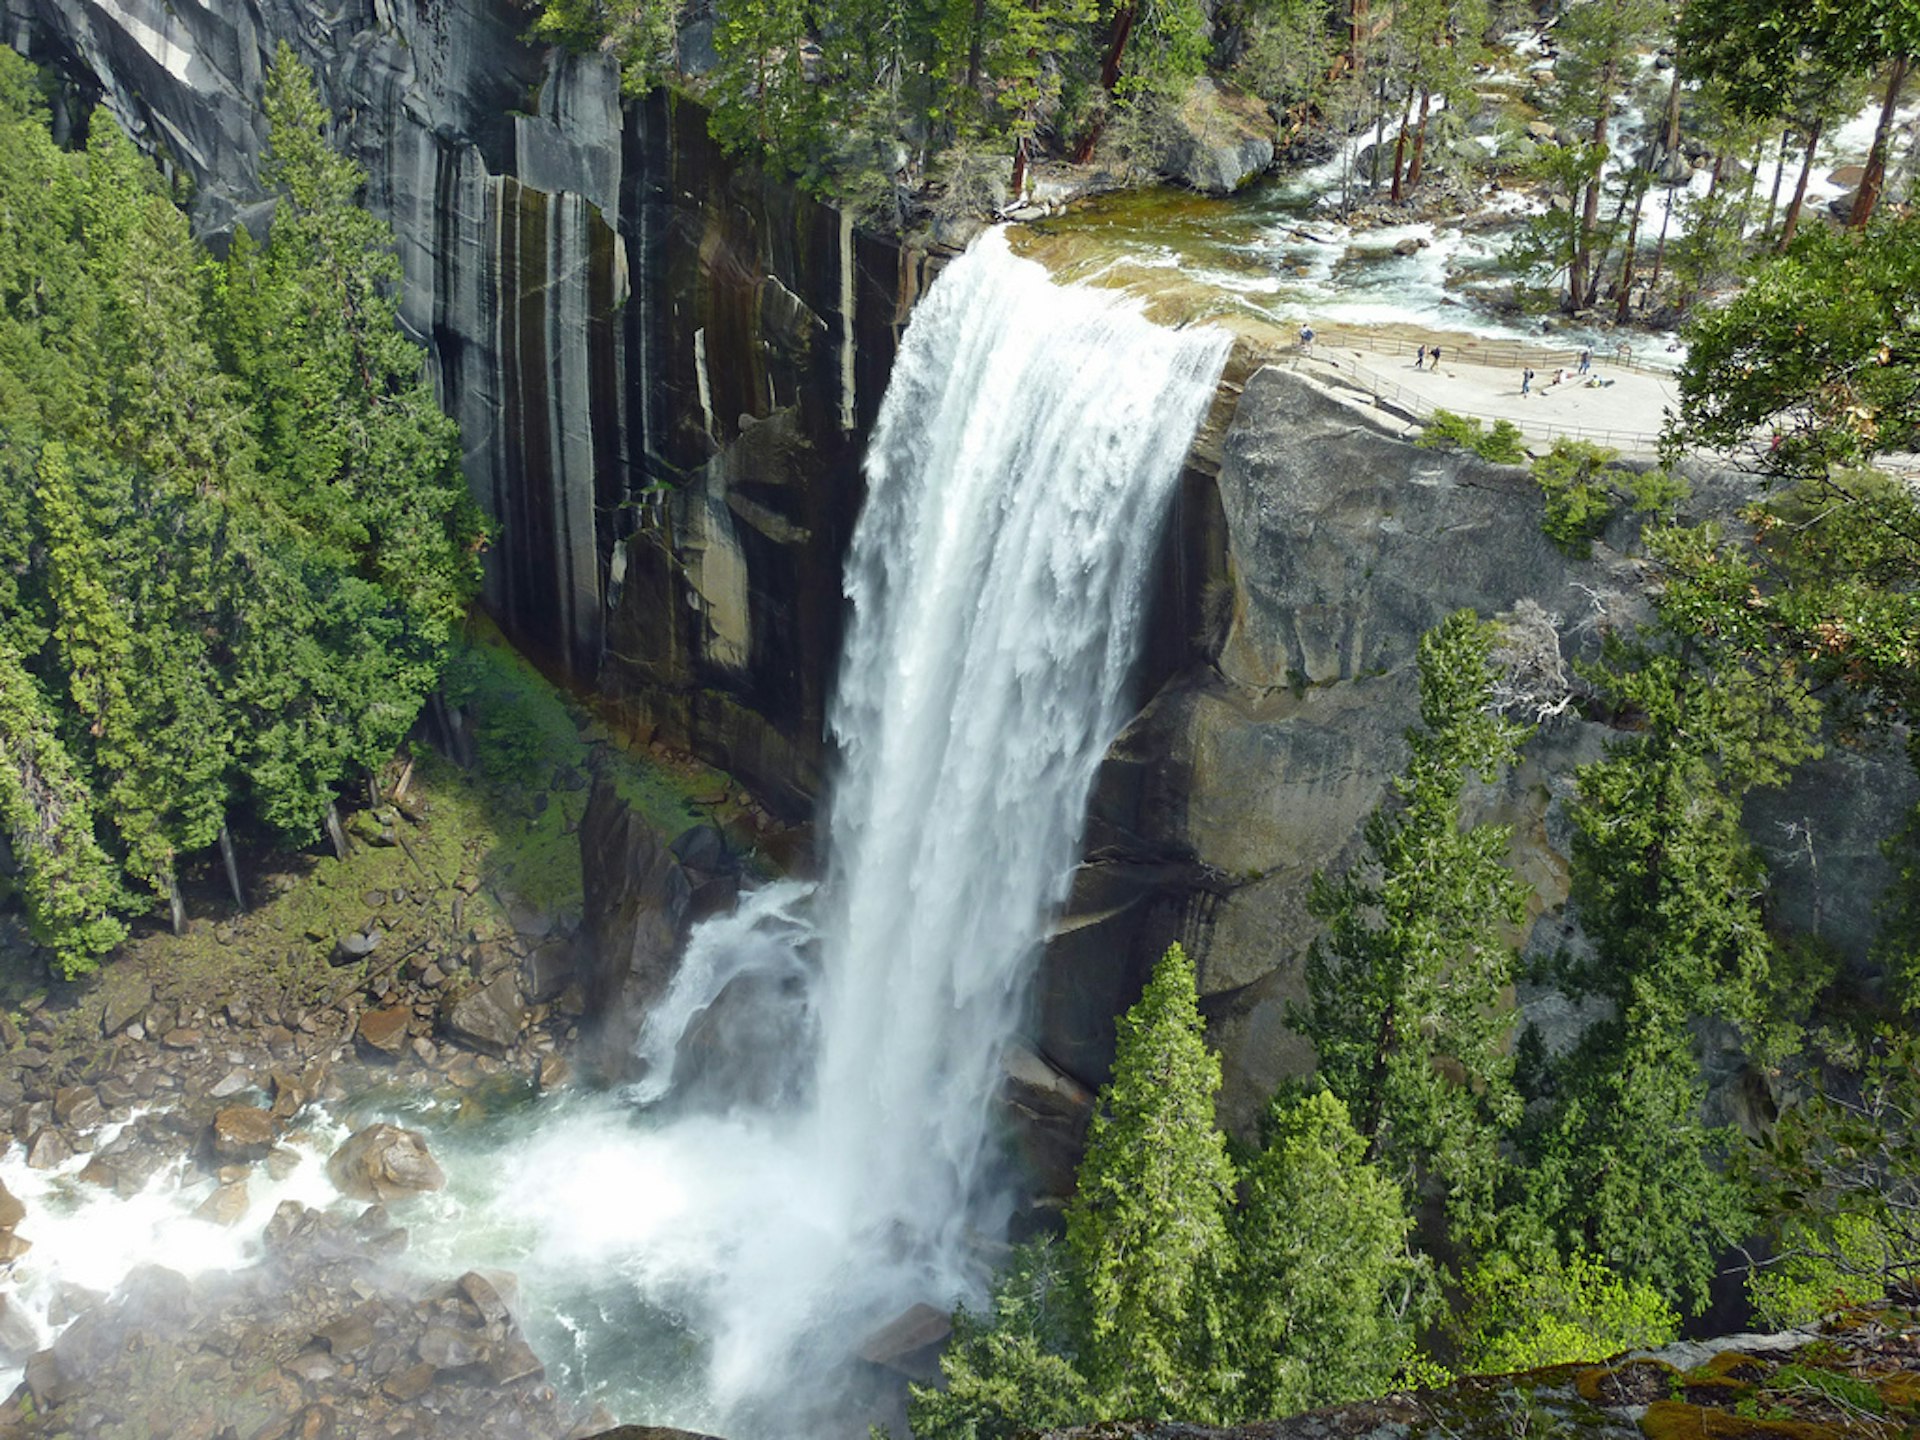 The hike to Vernal Falls takes in some classic Yosemite views. Image by Frank Kovalchek / CC BY 2.0